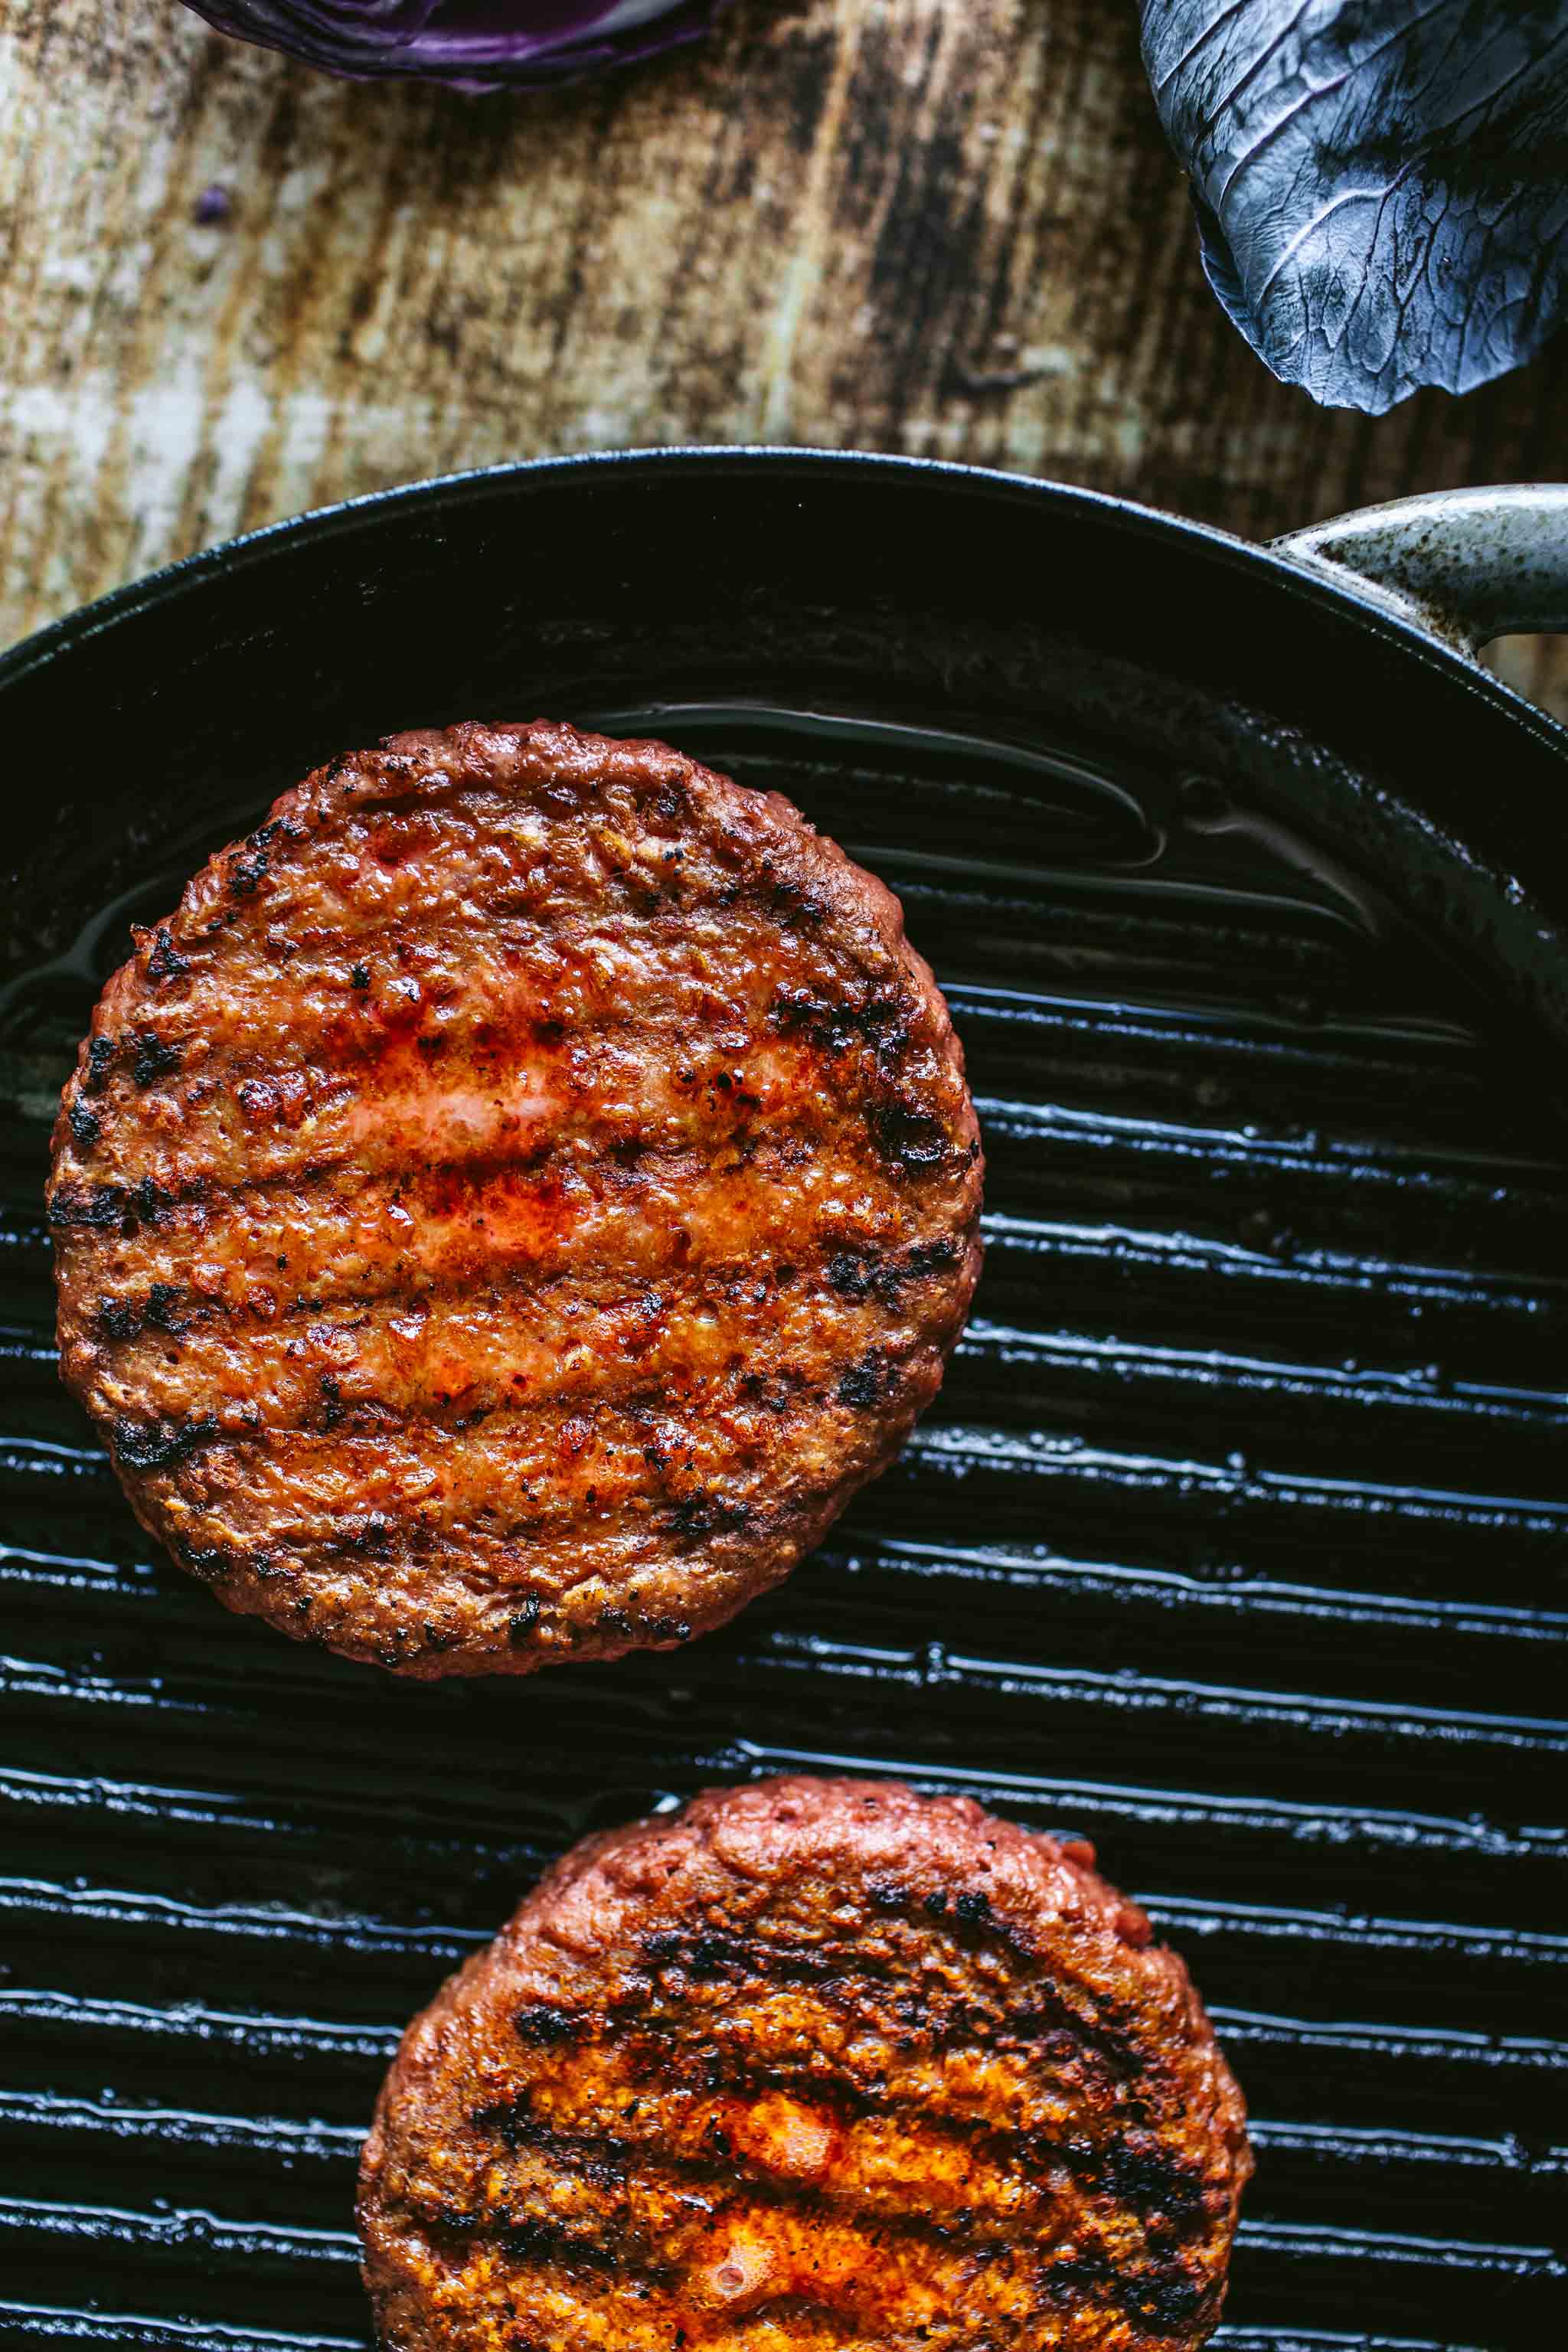 Veggie burgers cooking on grill.